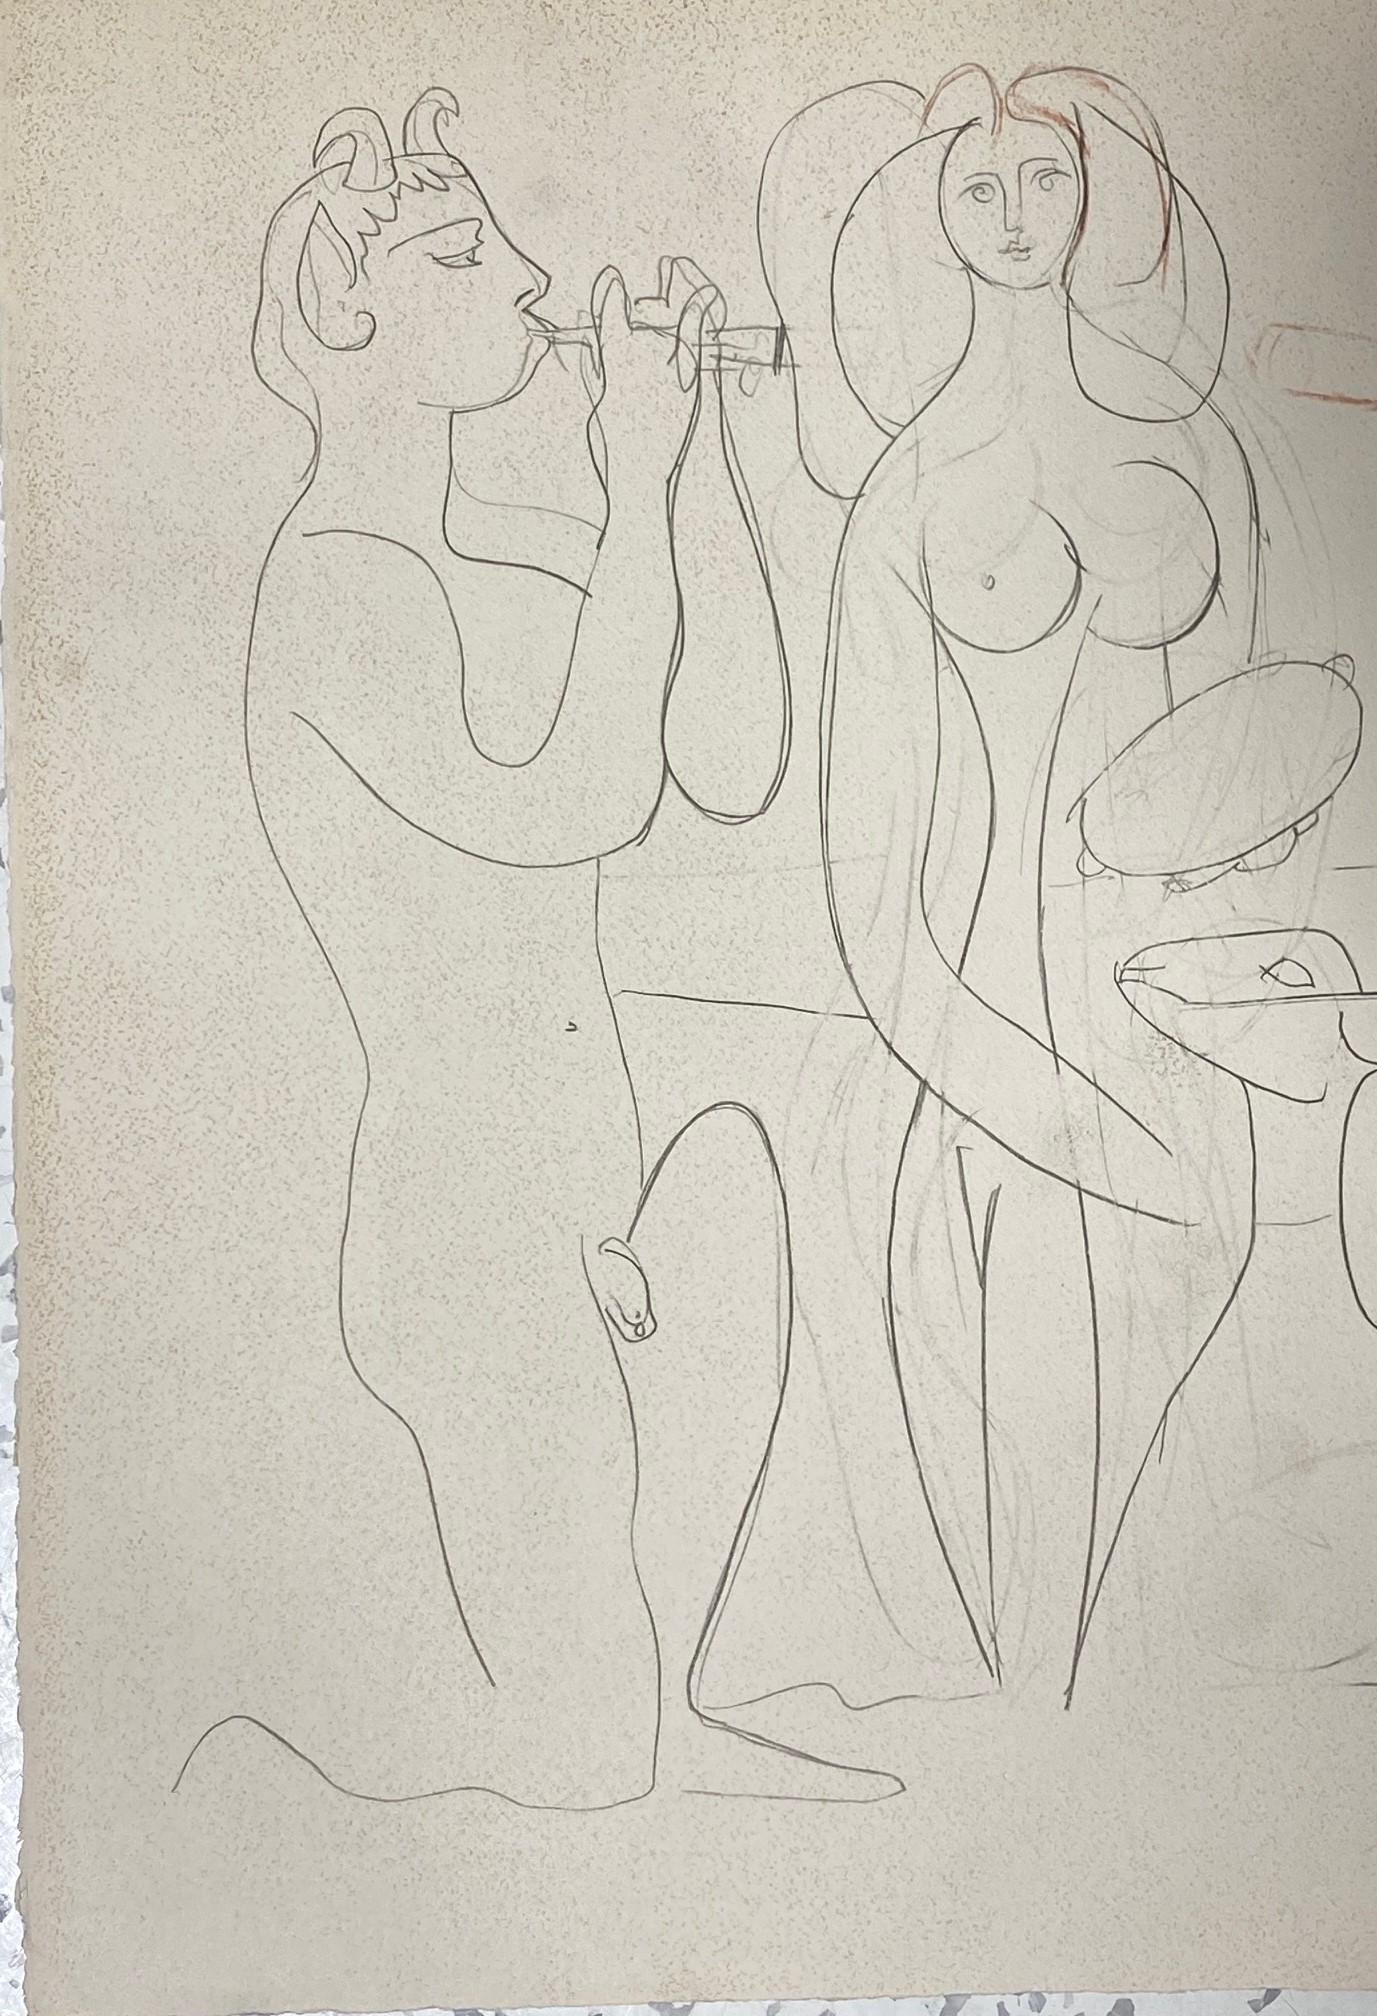 Pablo Picasso Limited Ed. Lithograph From Portfolio Les Dessins D'Antibes, 1958 In Good Condition For Sale In Studio City, CA